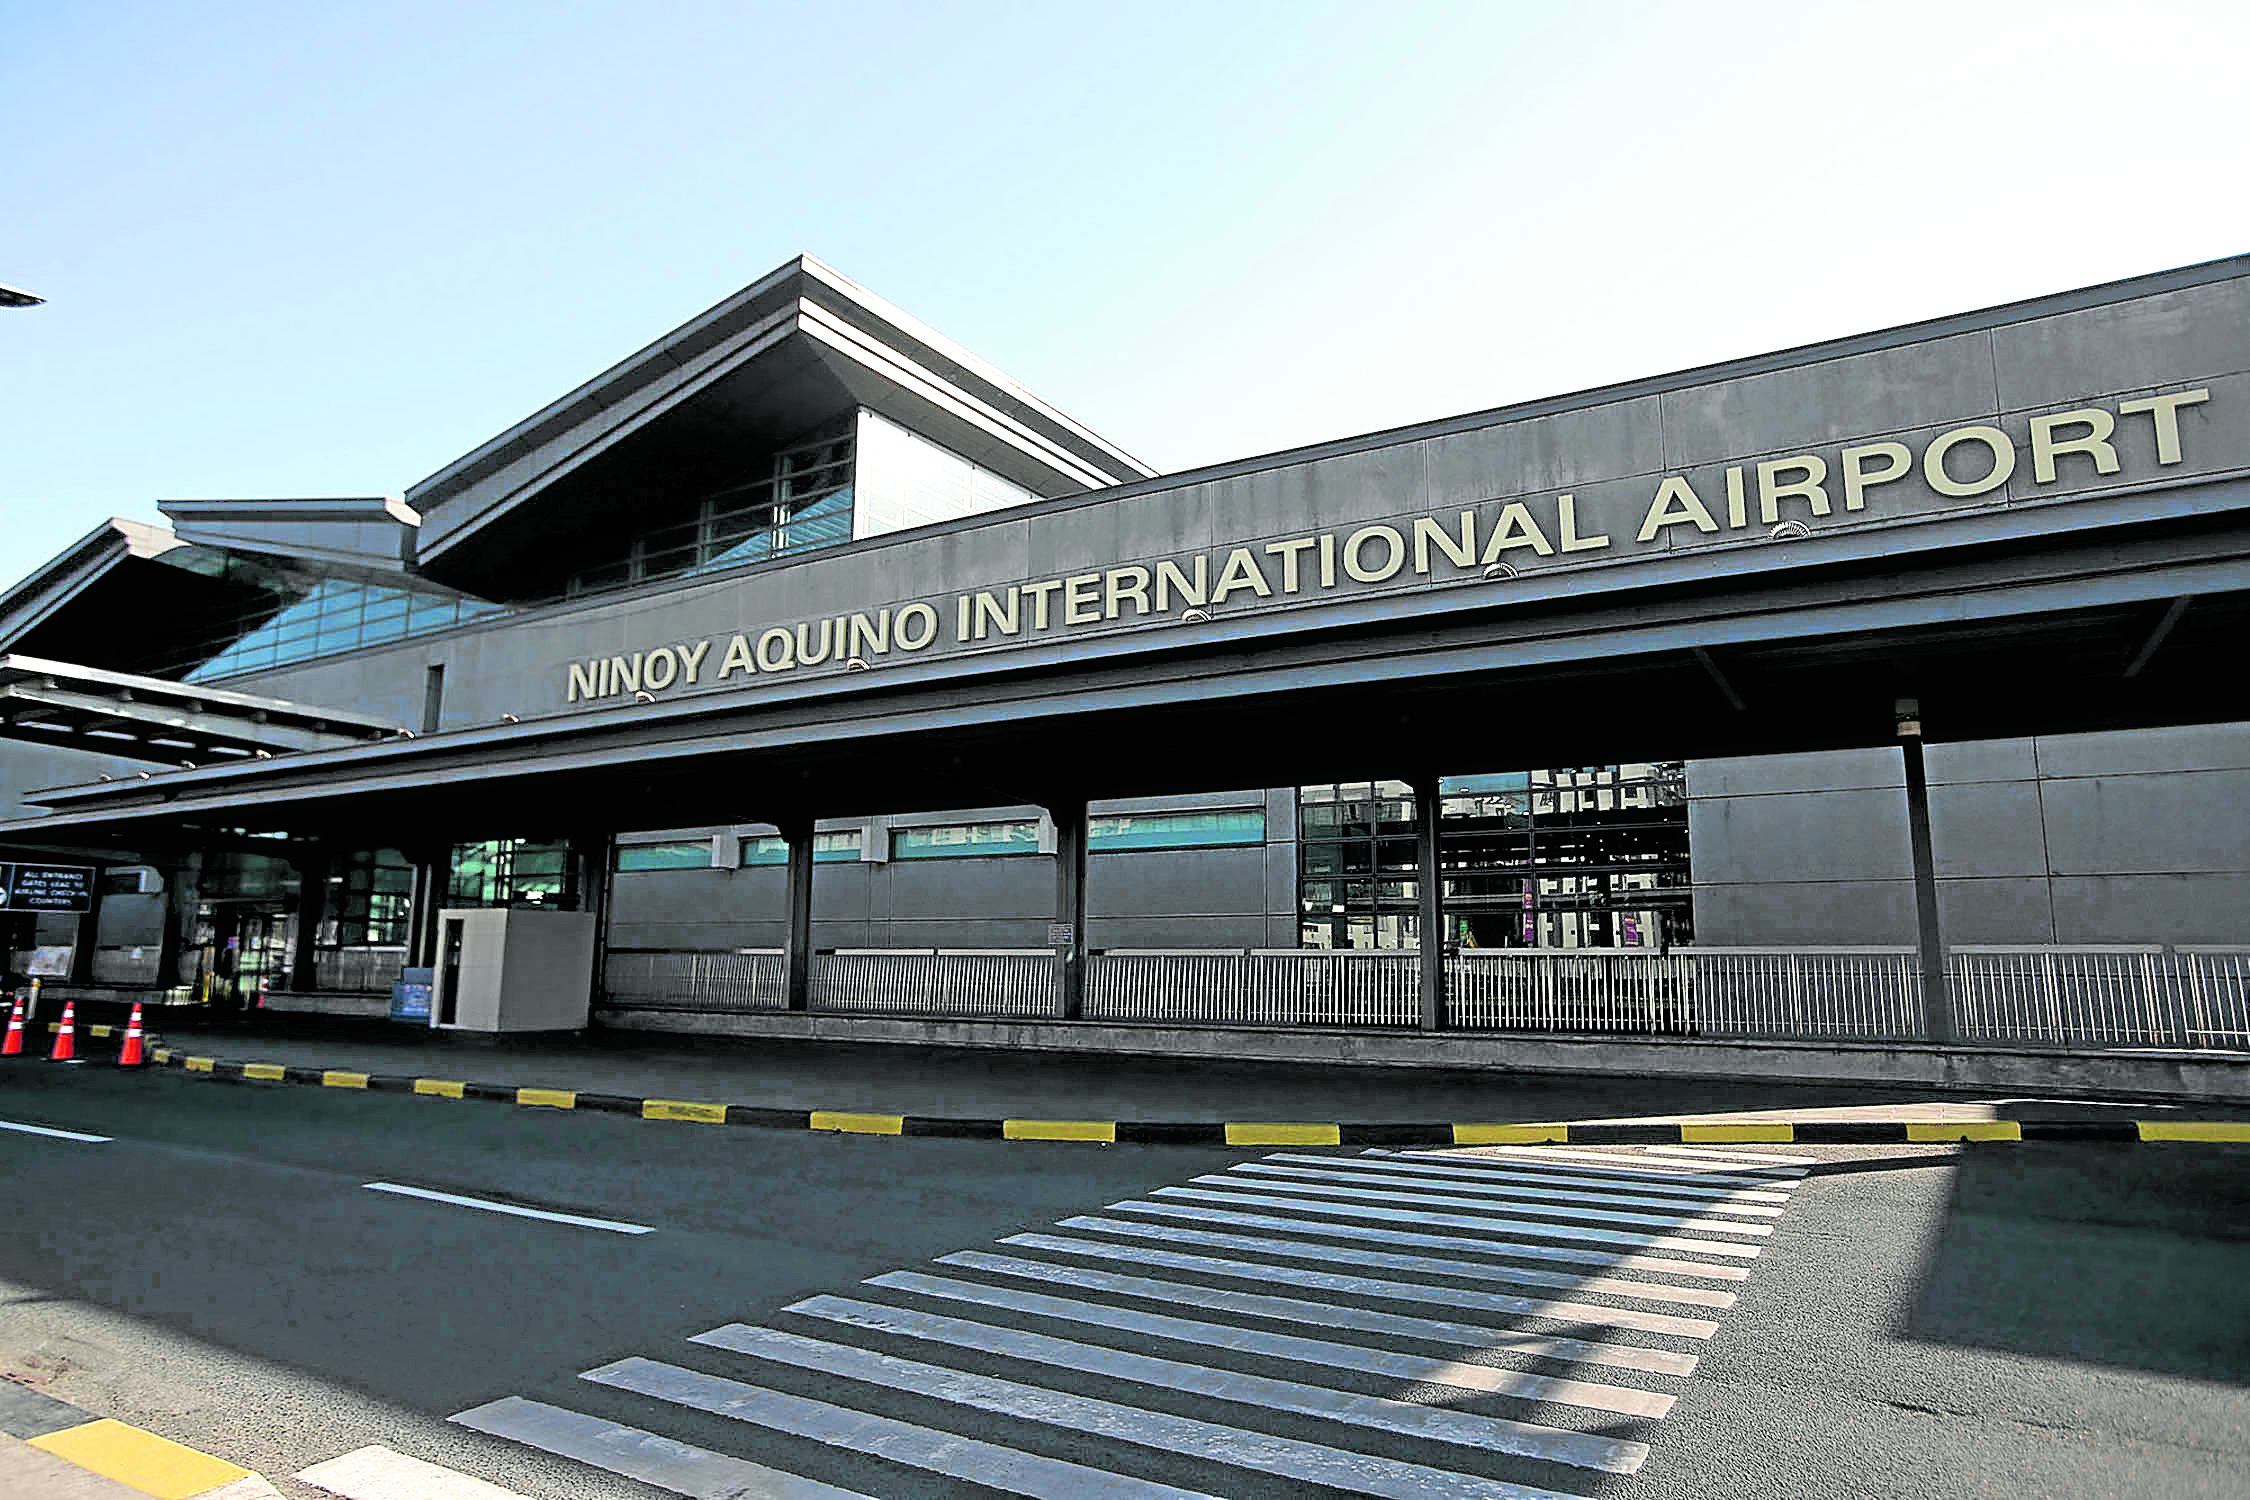 Ninoy Aquino International Airport (Naia) landed in the 15th spot of the 50 most internationally connected airports in the world.